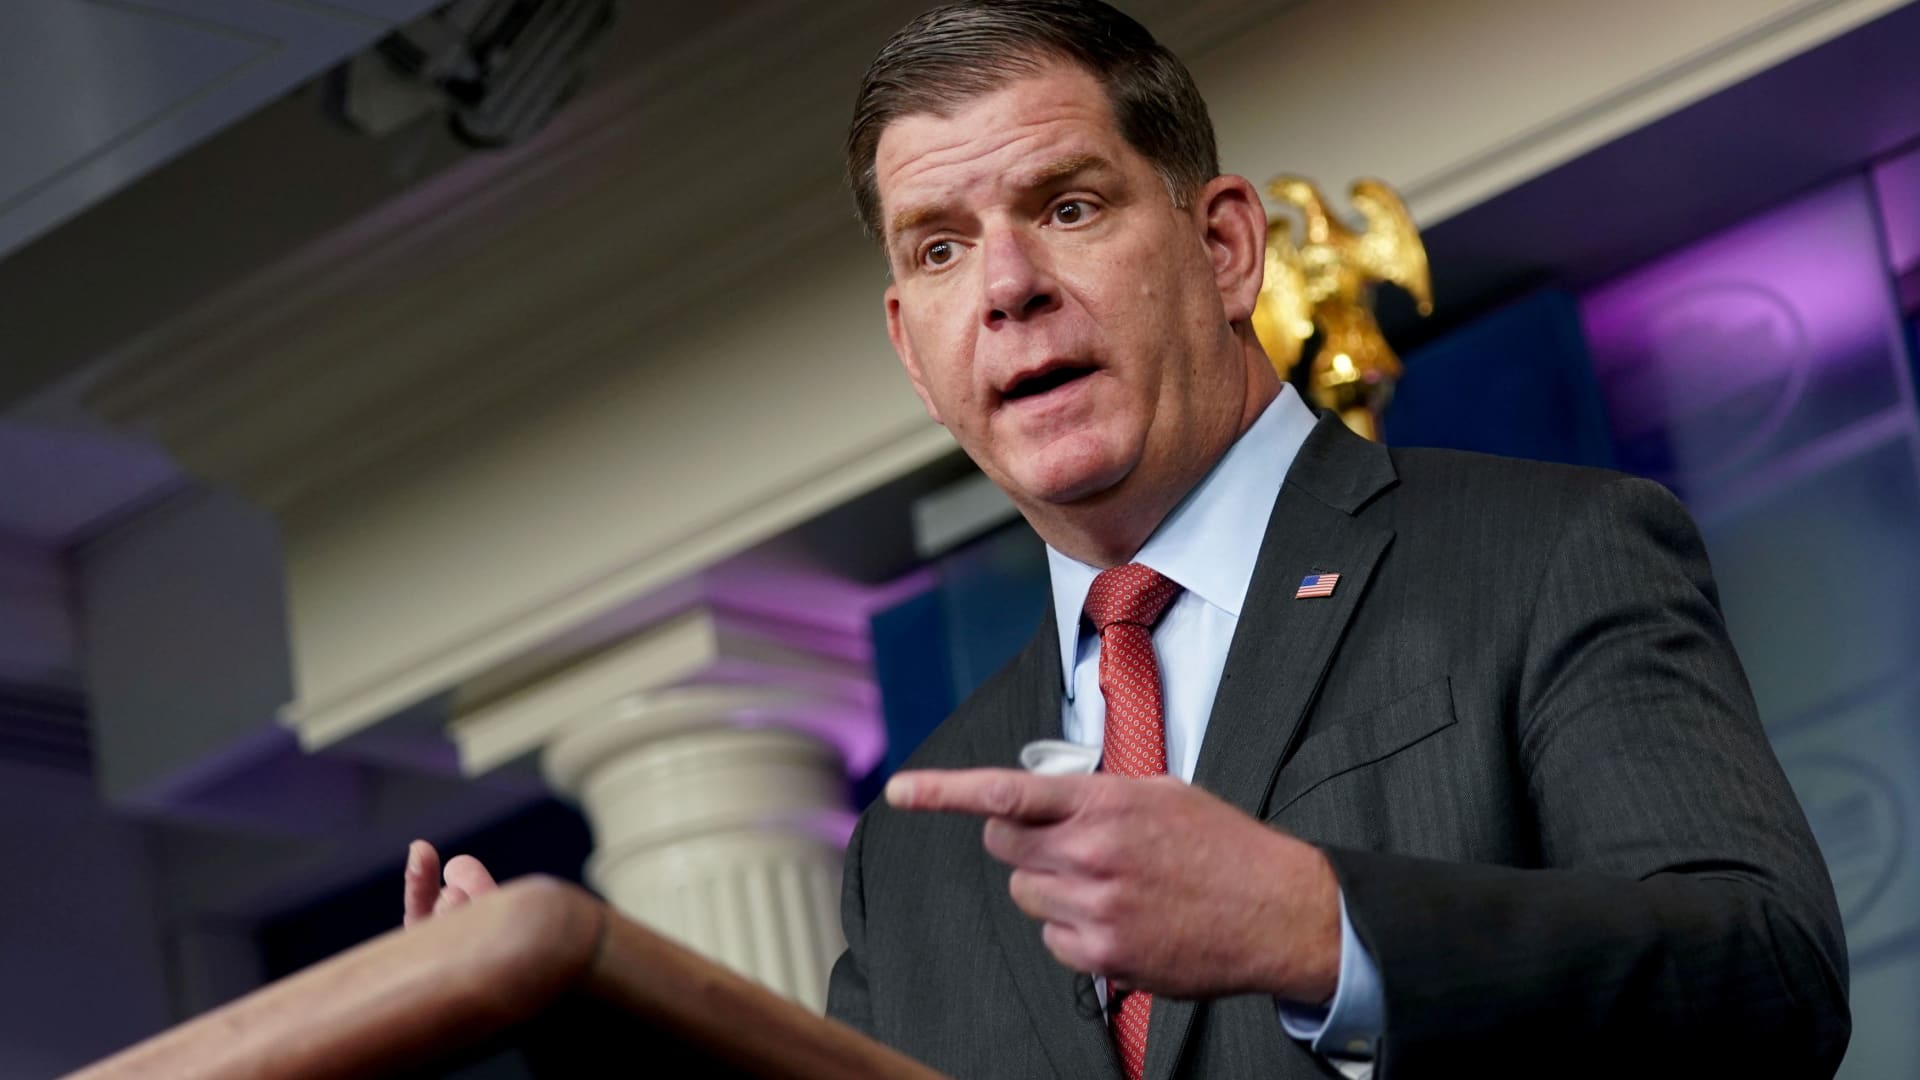 A ‘catastrophe’ is coming for economy: Labor Secretary Marty Walsh